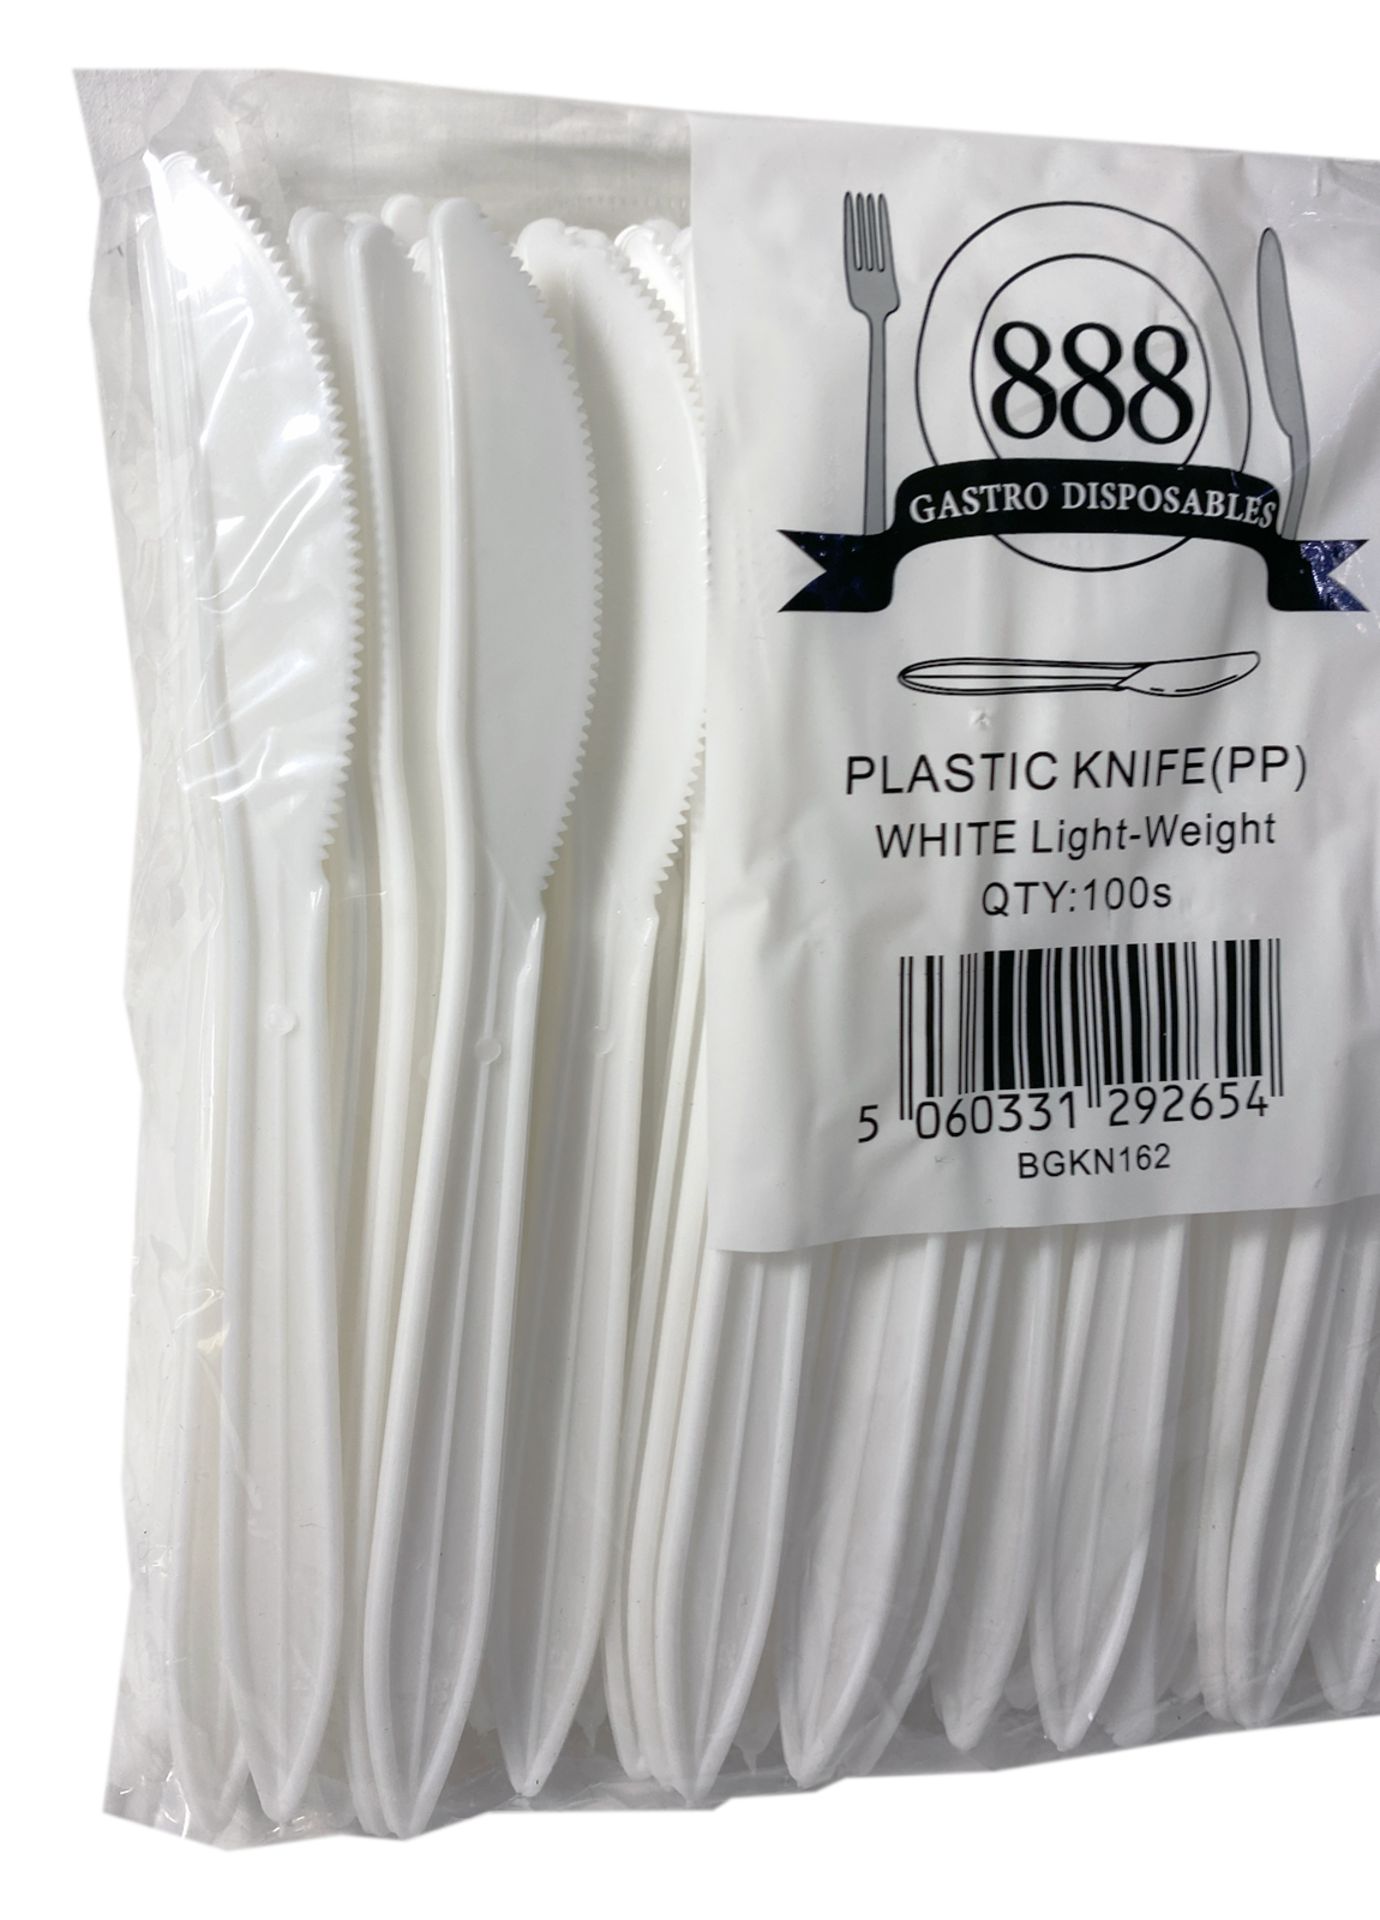 10 x Boxes of 1000 Plastic Knives by 888 Gastro Disposables - Image 2 of 3